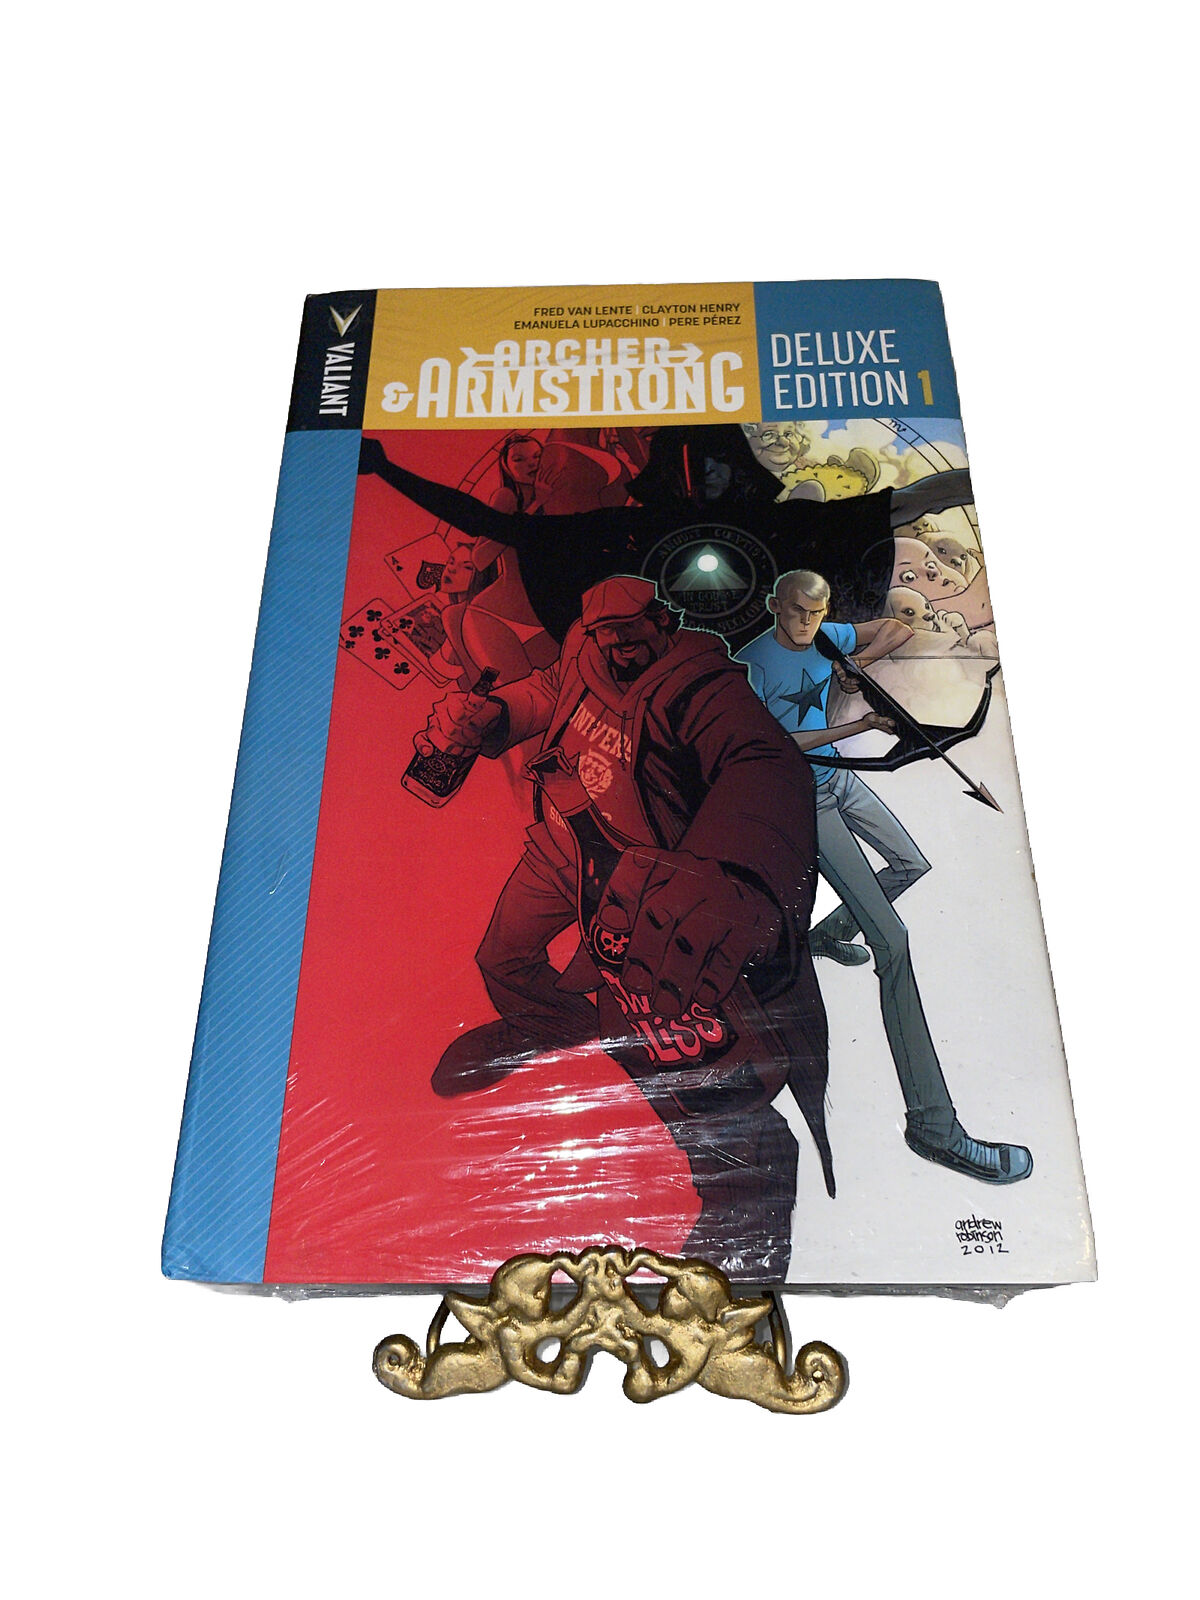 Archer & Armstrong Deluxe Edition #1 (Valiant Entertainment, 2014)